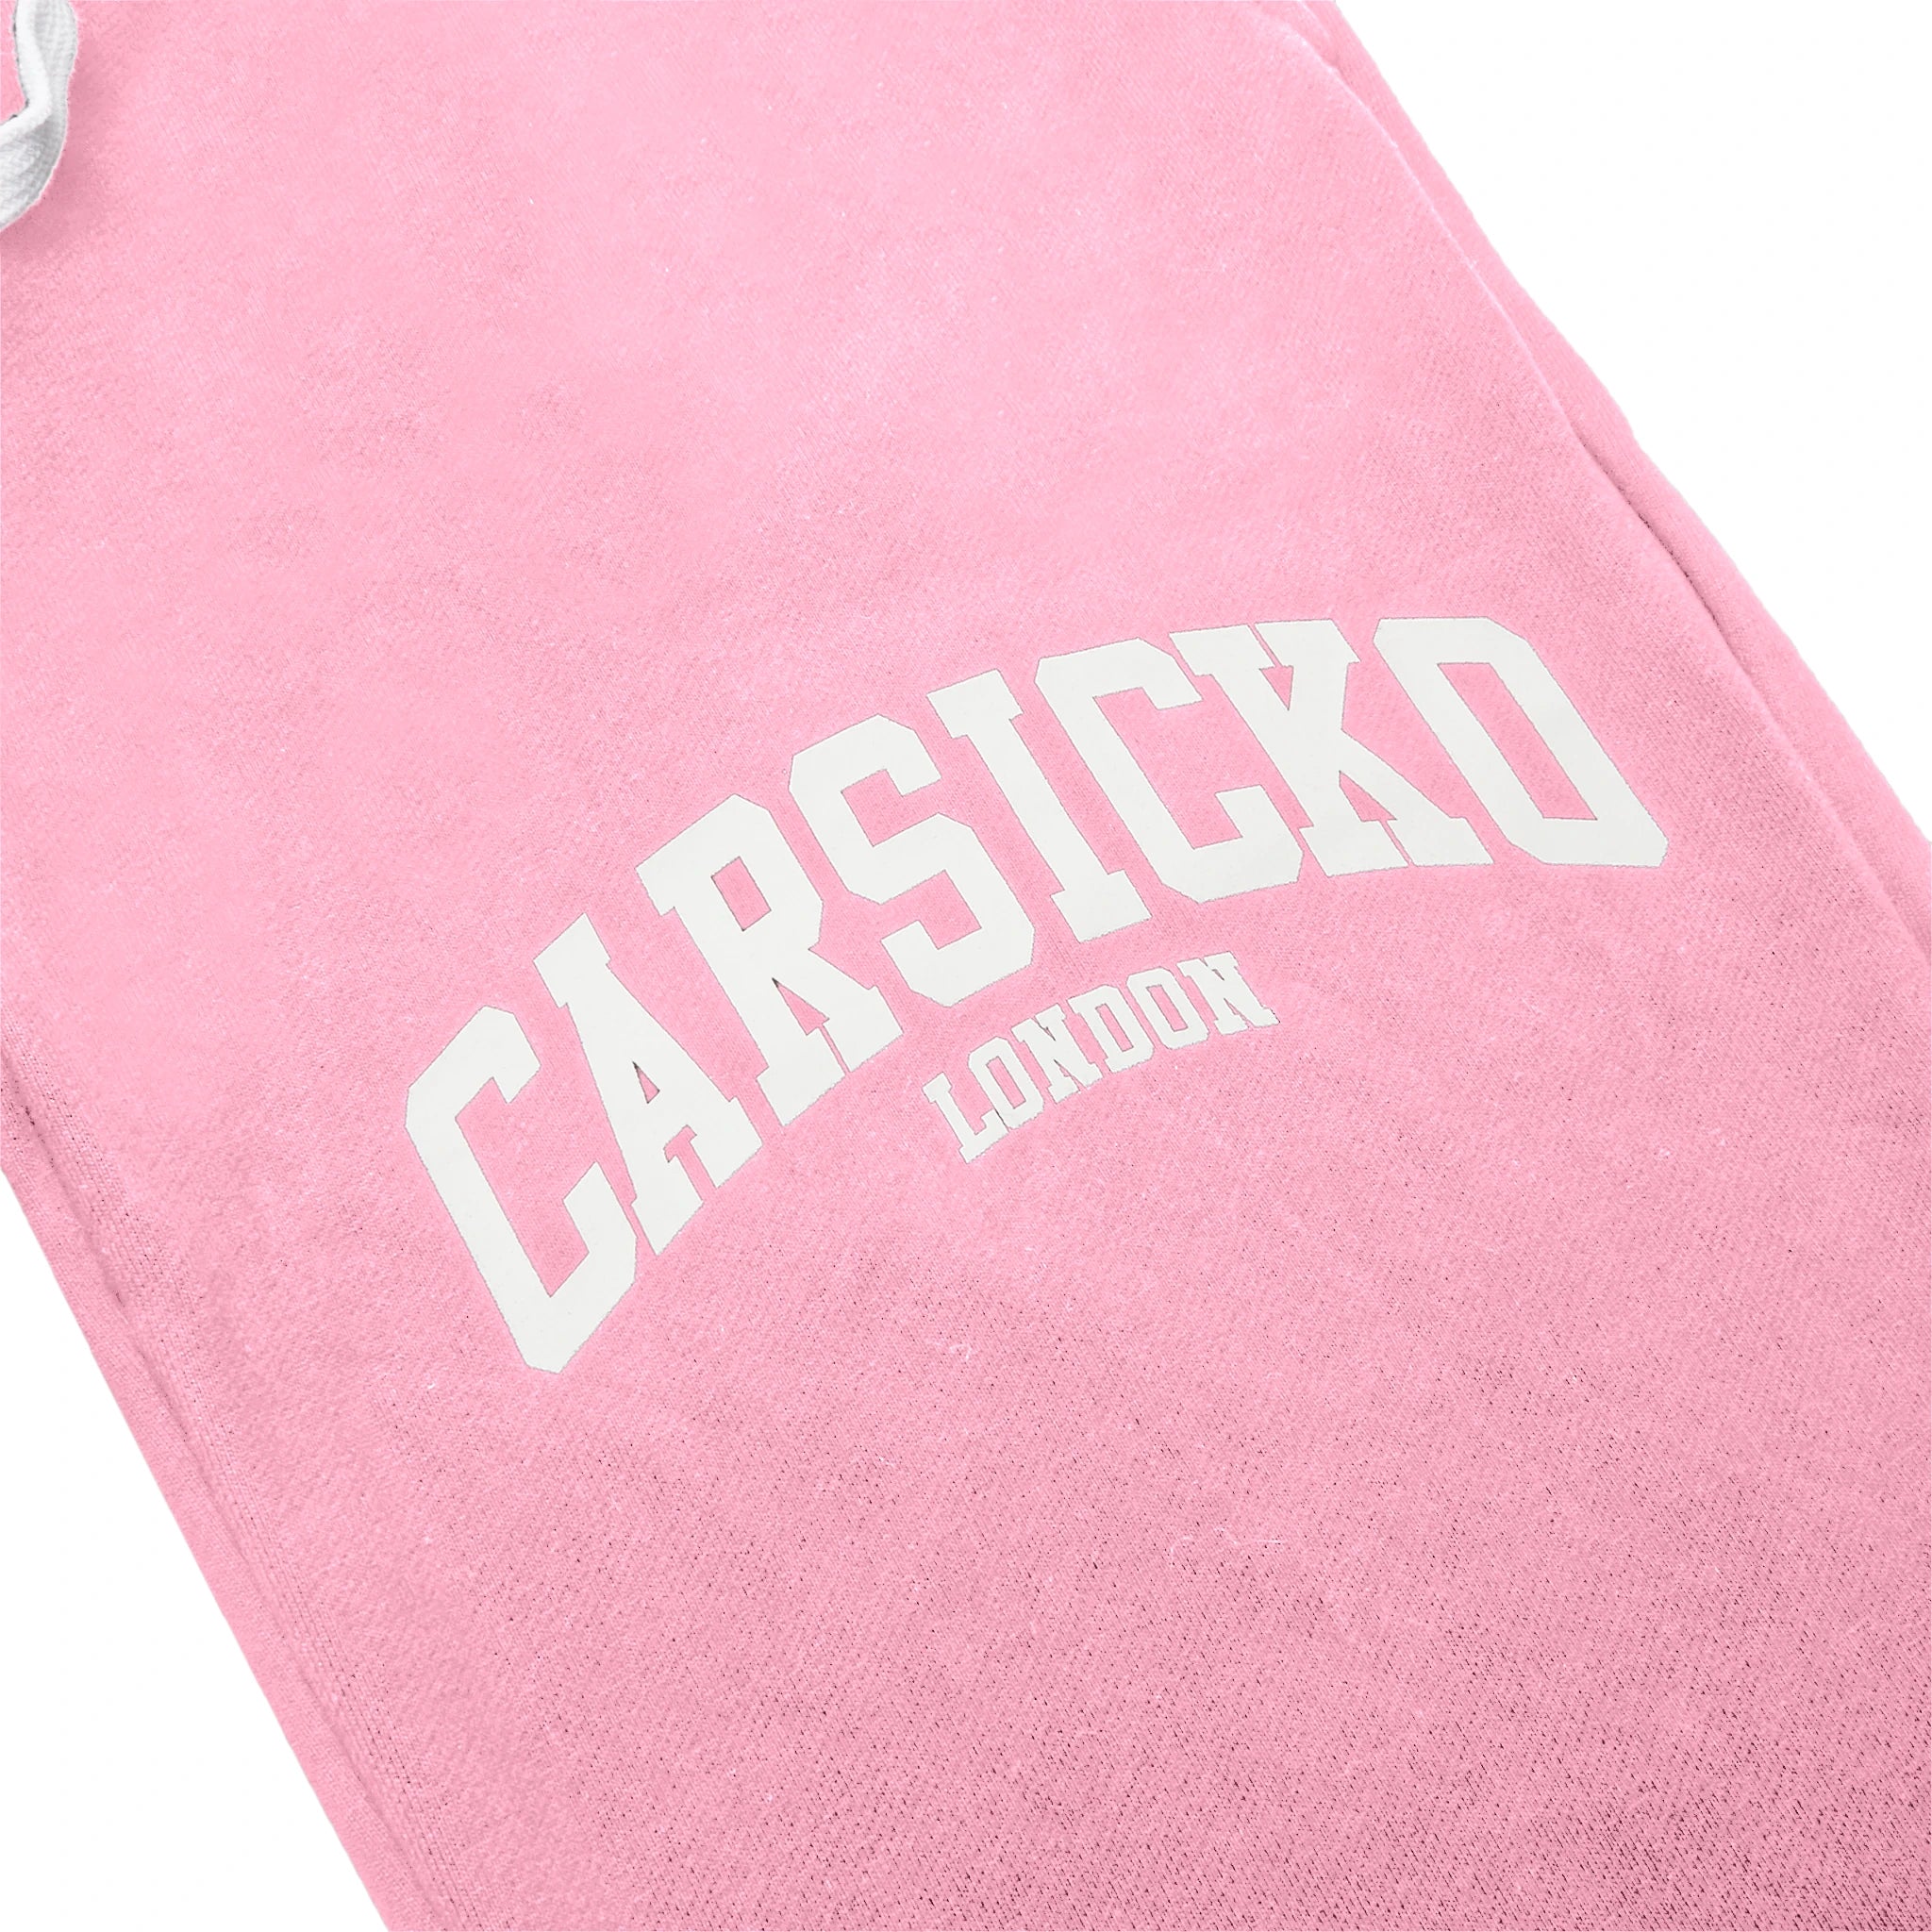 Knee view of Carsicko London Pink Track Pants